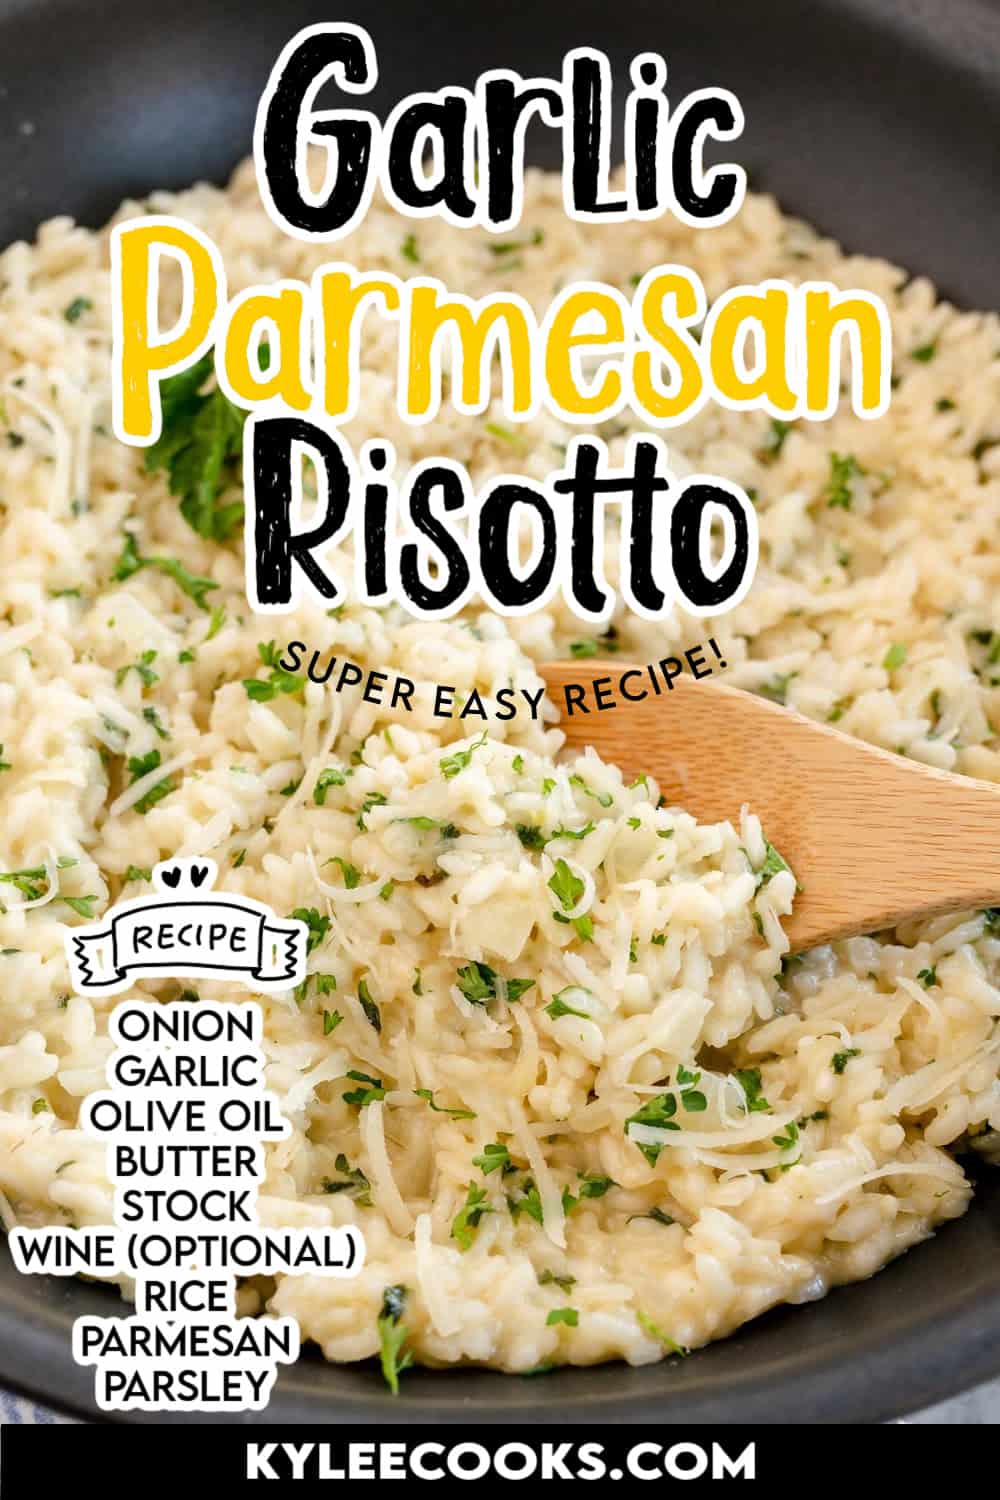 garlic parmesan risotto with recipe name and ingredients overlaid in text.